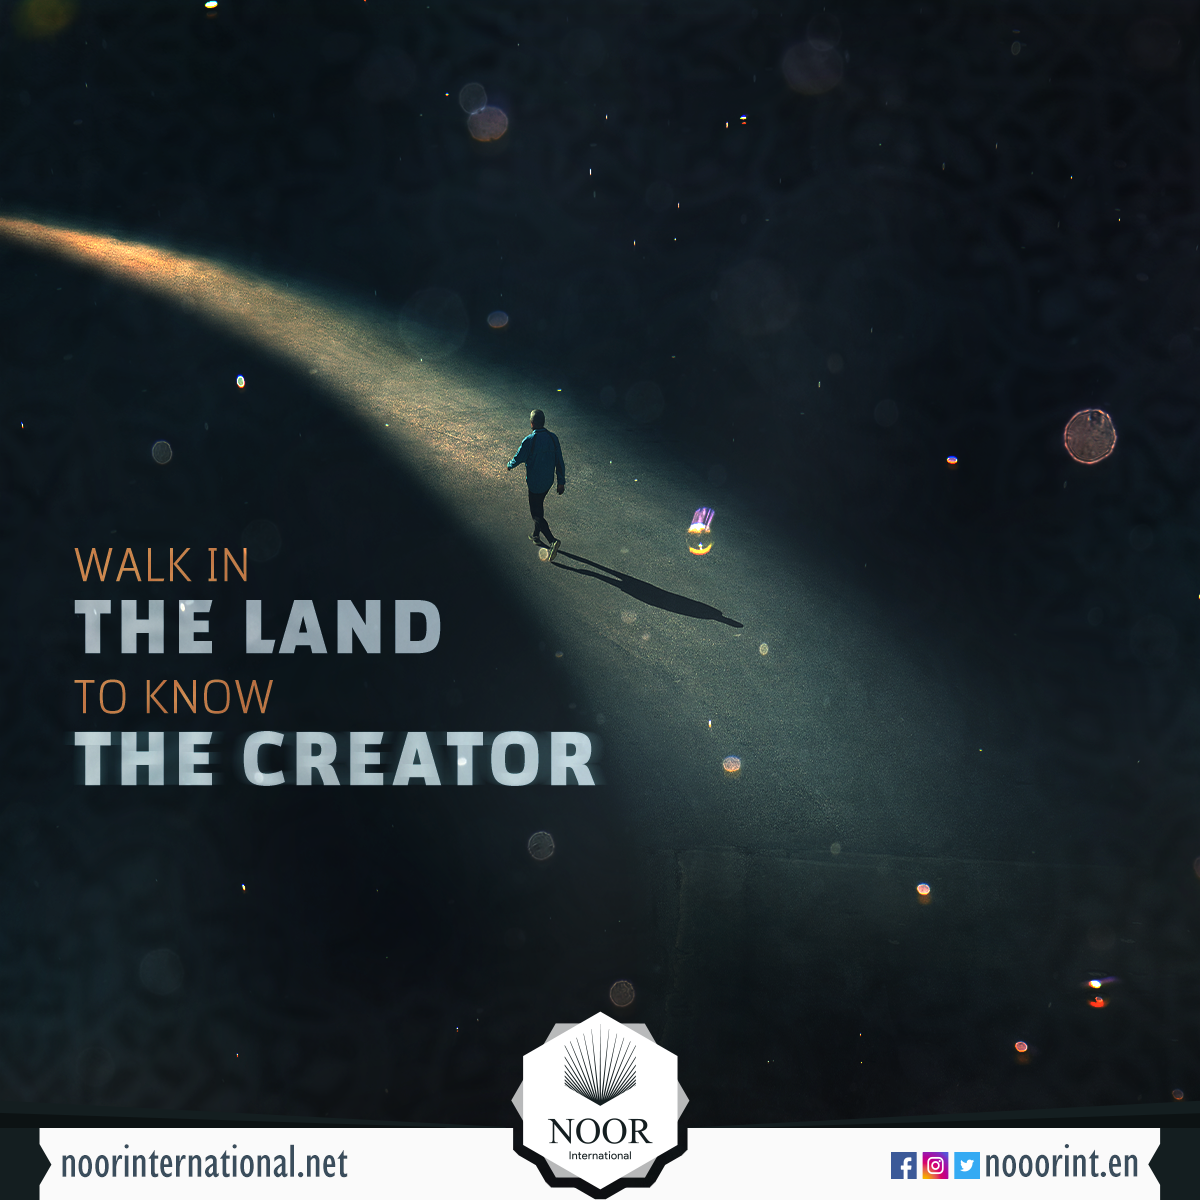 Walk in the land to know the creator